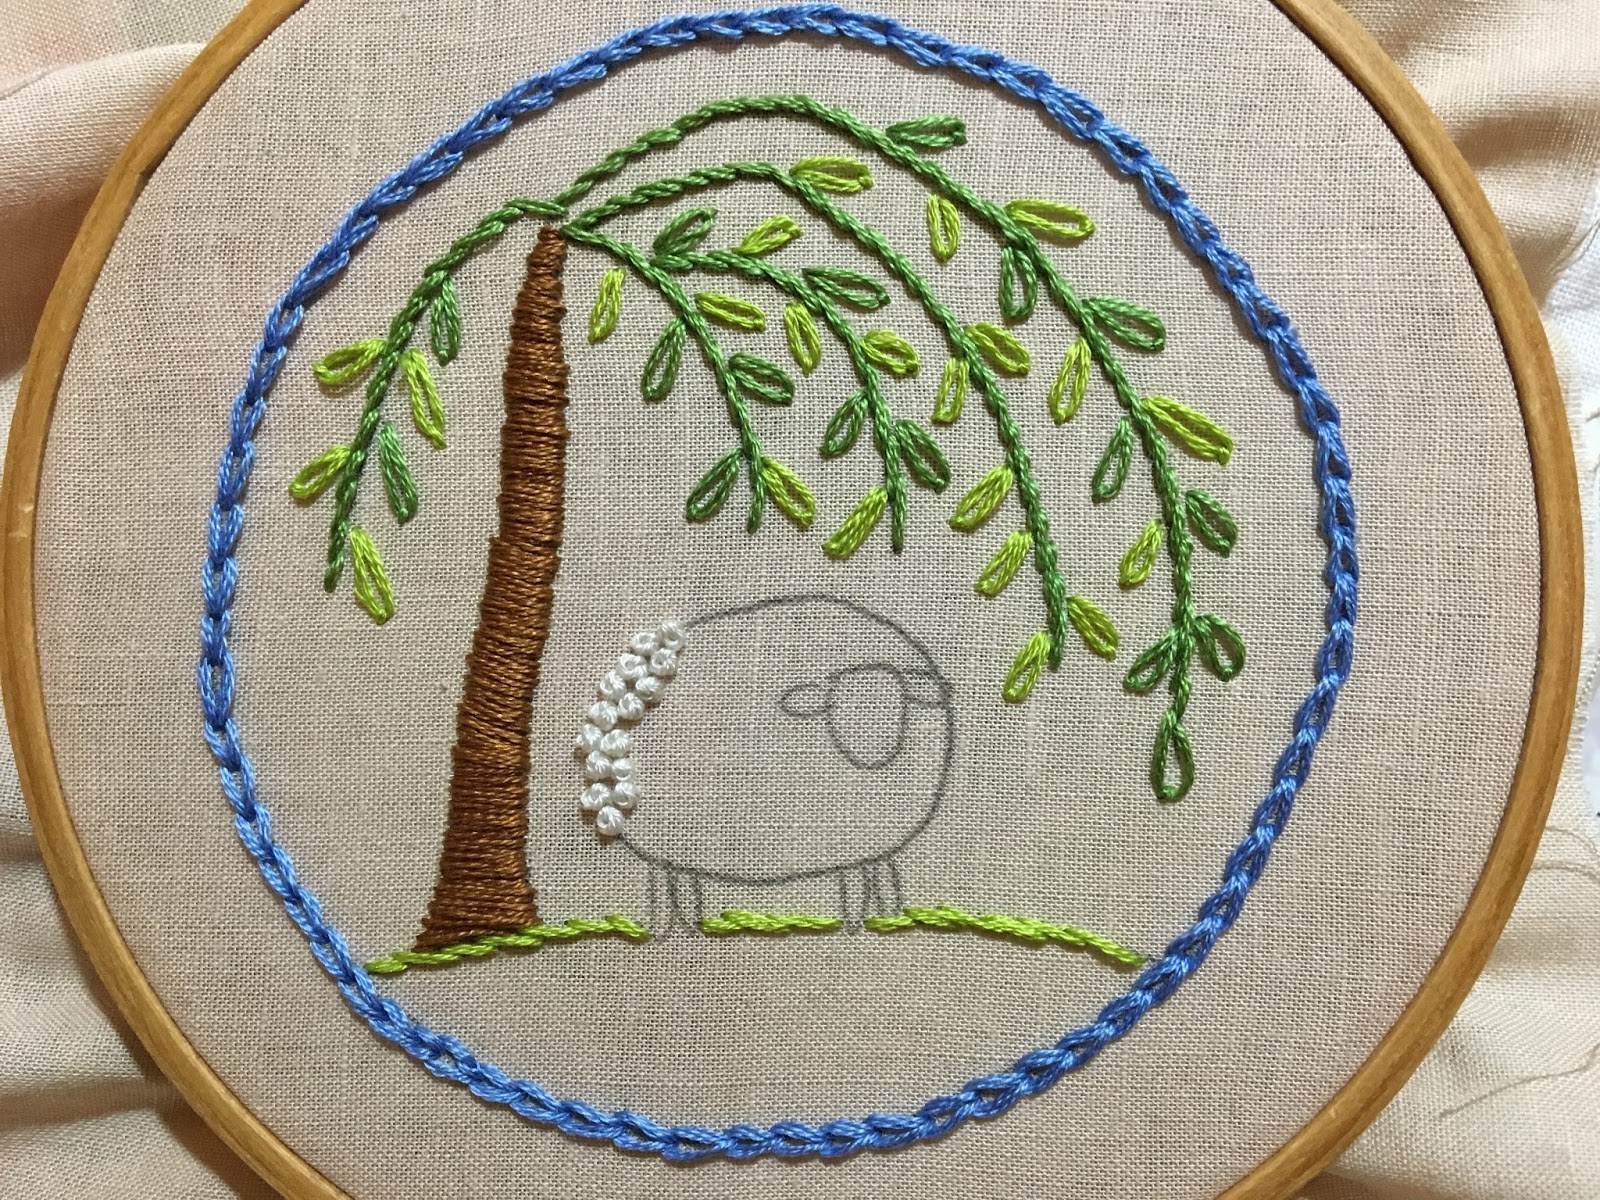 embroidered sheep